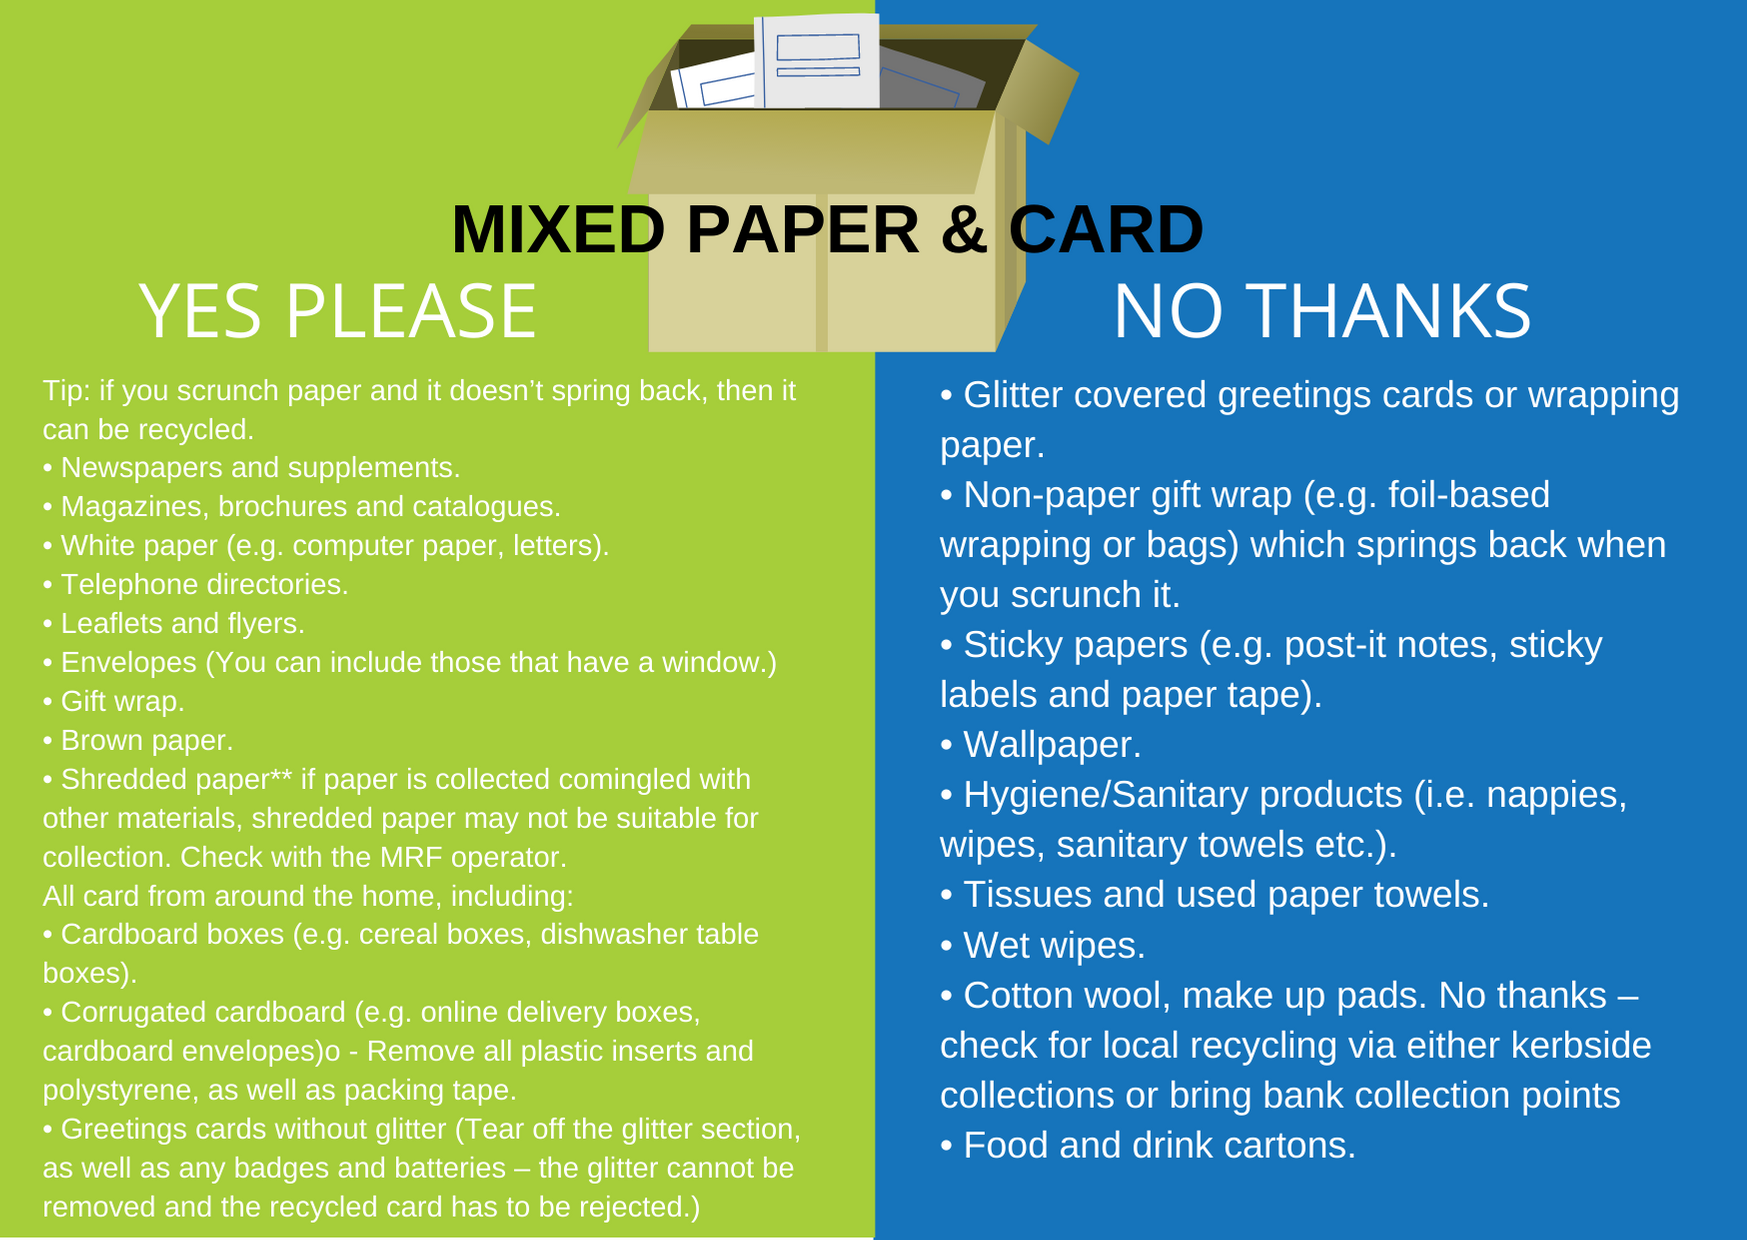 What MIXED paper and card can i recycle